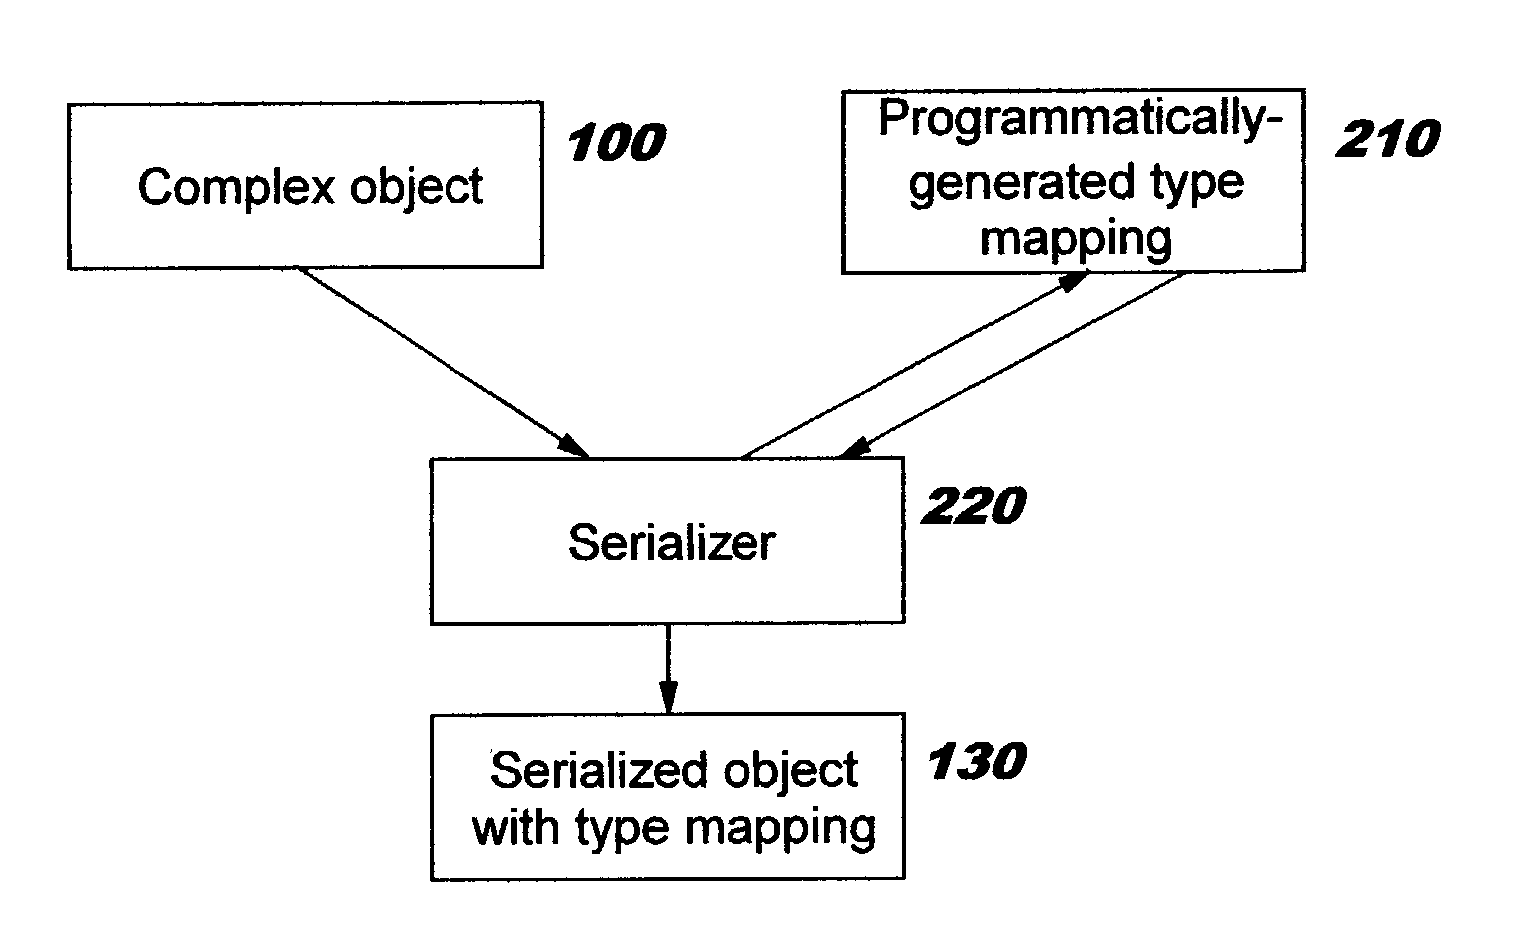 Programmatically serializing complex objects using self-healing techniques